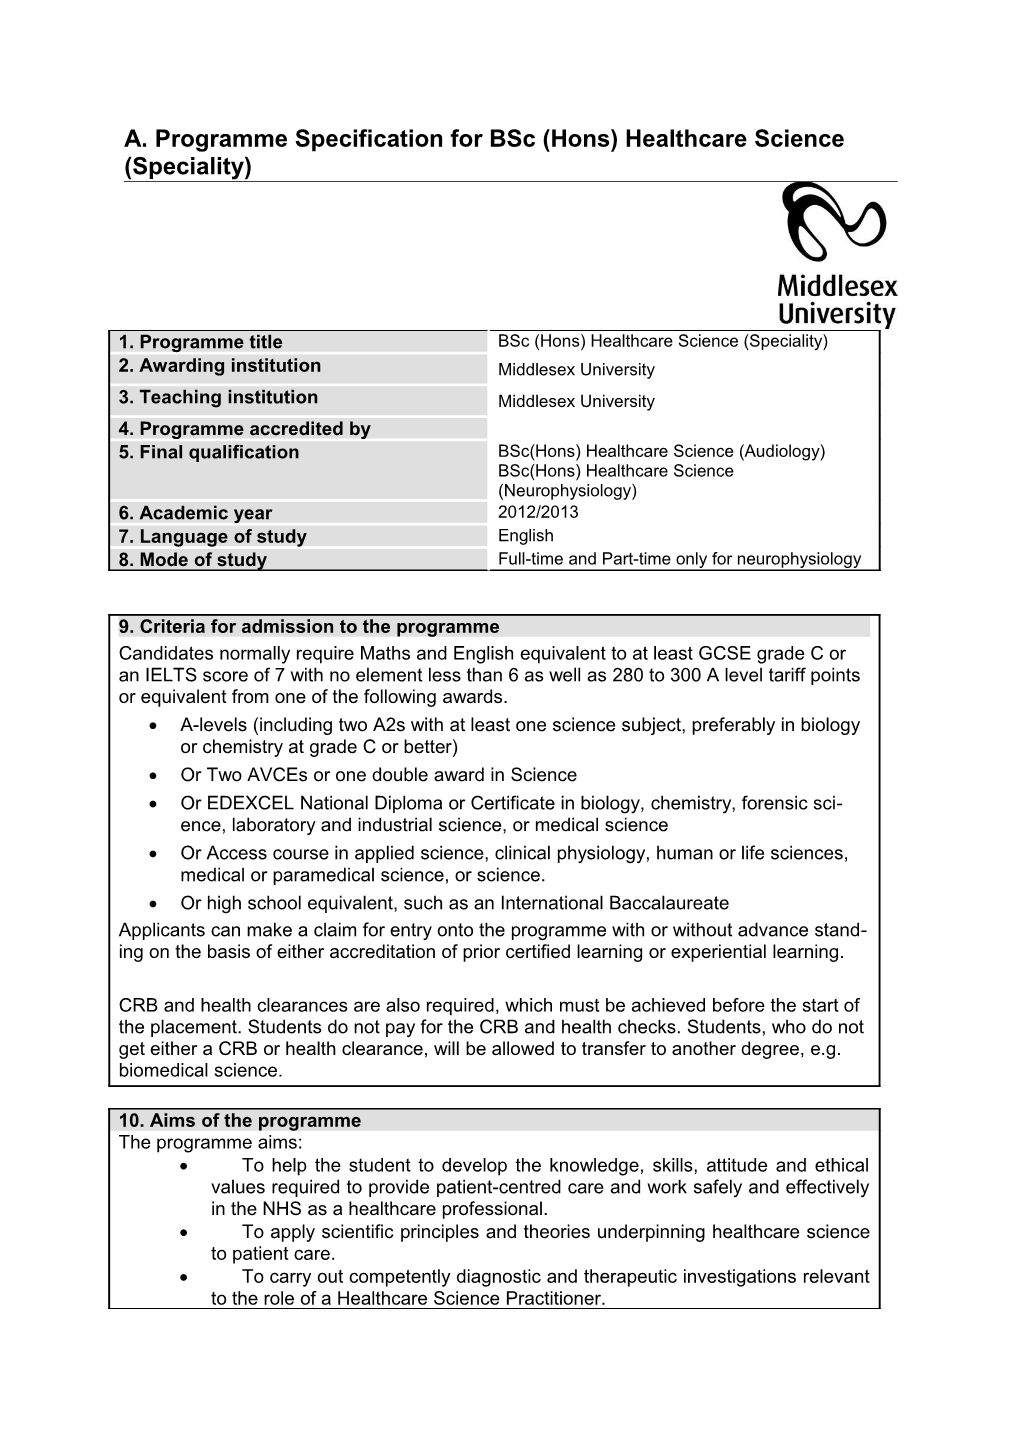 A. Programme Specification for Bsc (Hons) Healthcare Science (Speciality)